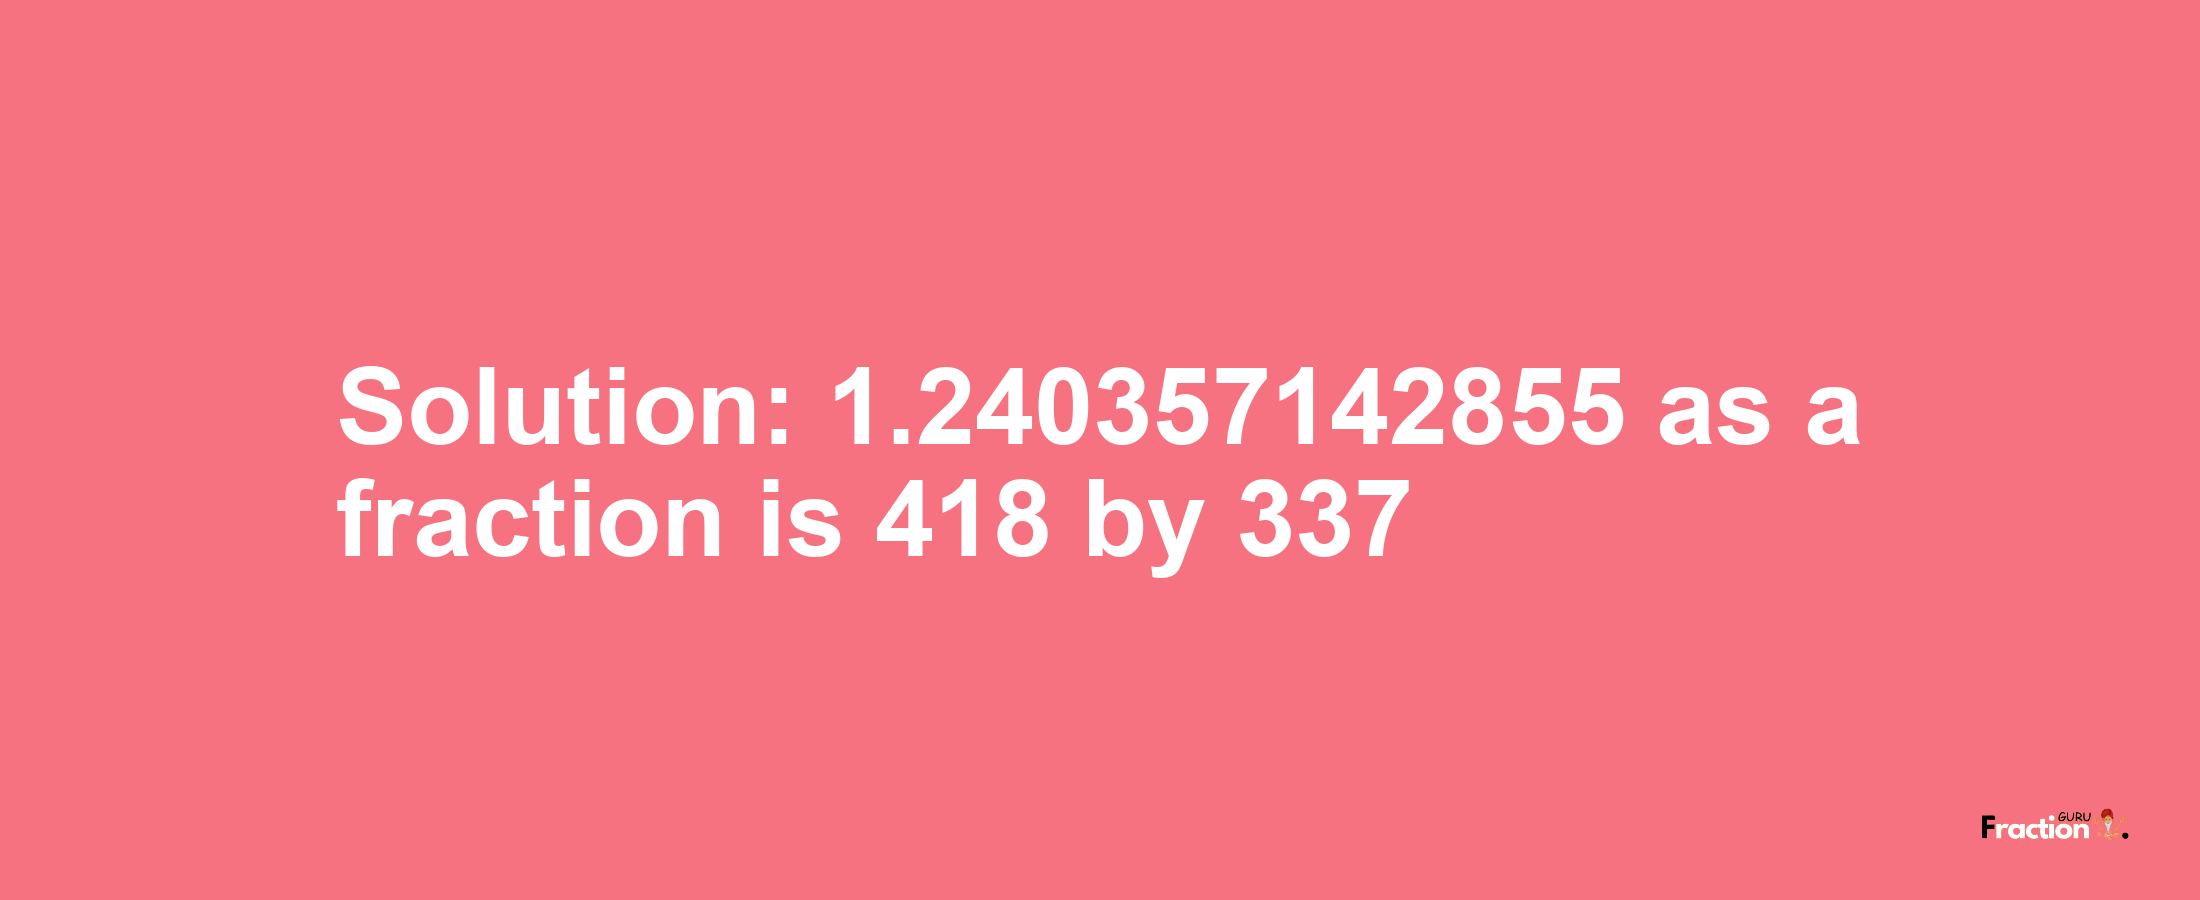 Solution:1.240357142855 as a fraction is 418/337